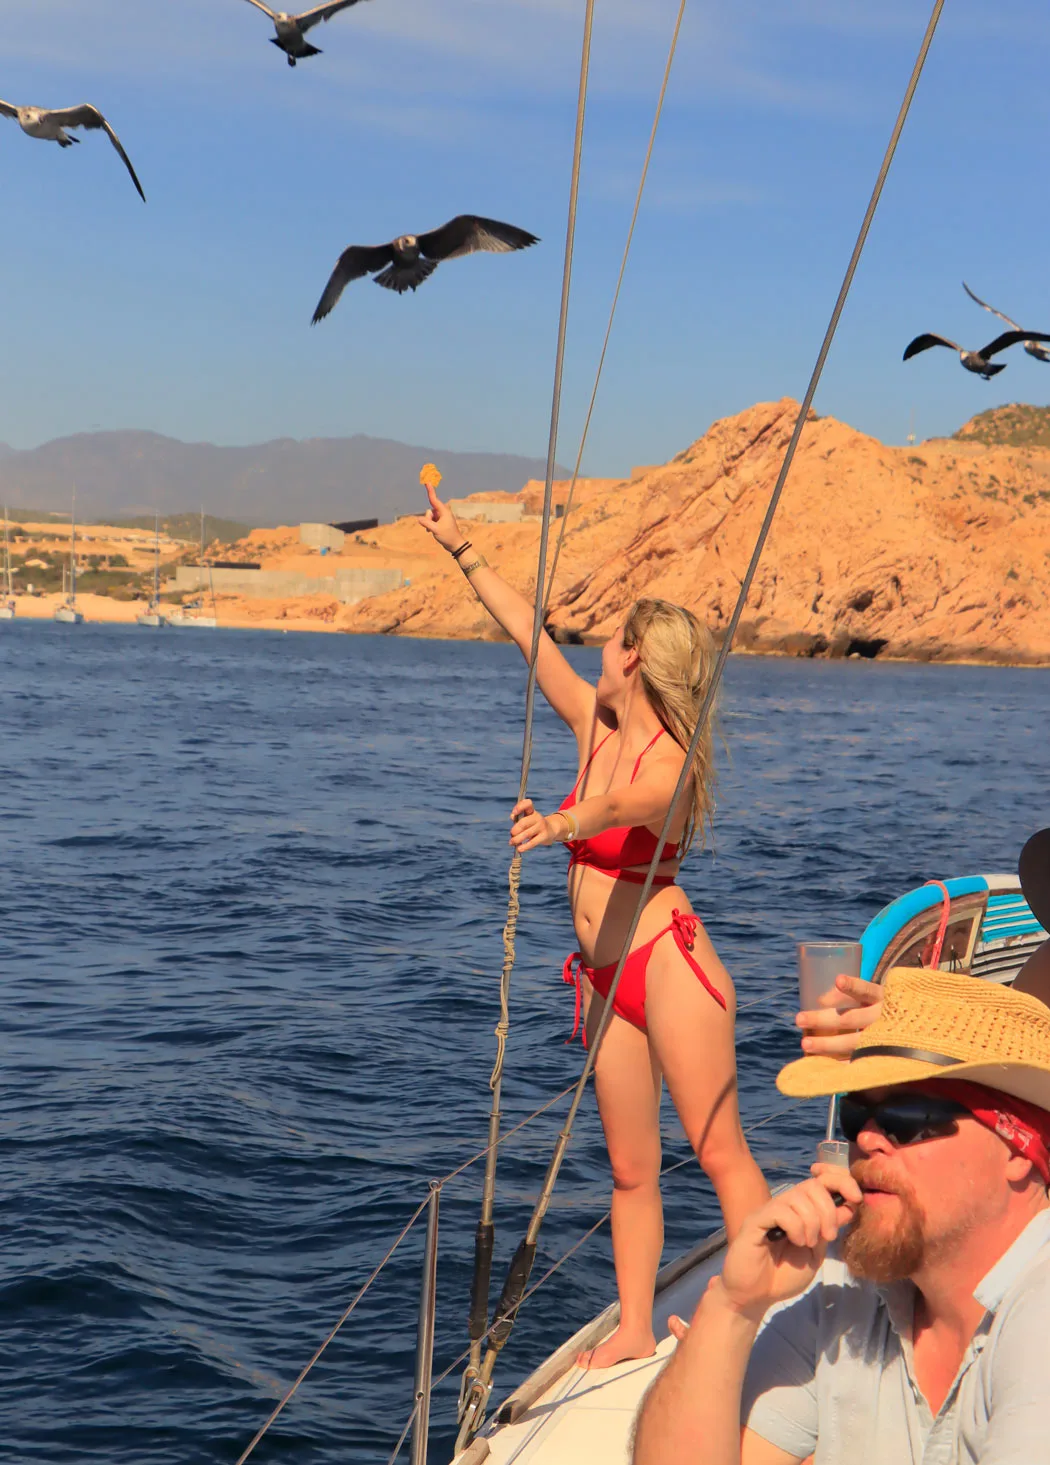 A woman in a red bikini feeds seagulls on a boat tour in Cabo San Lucas.